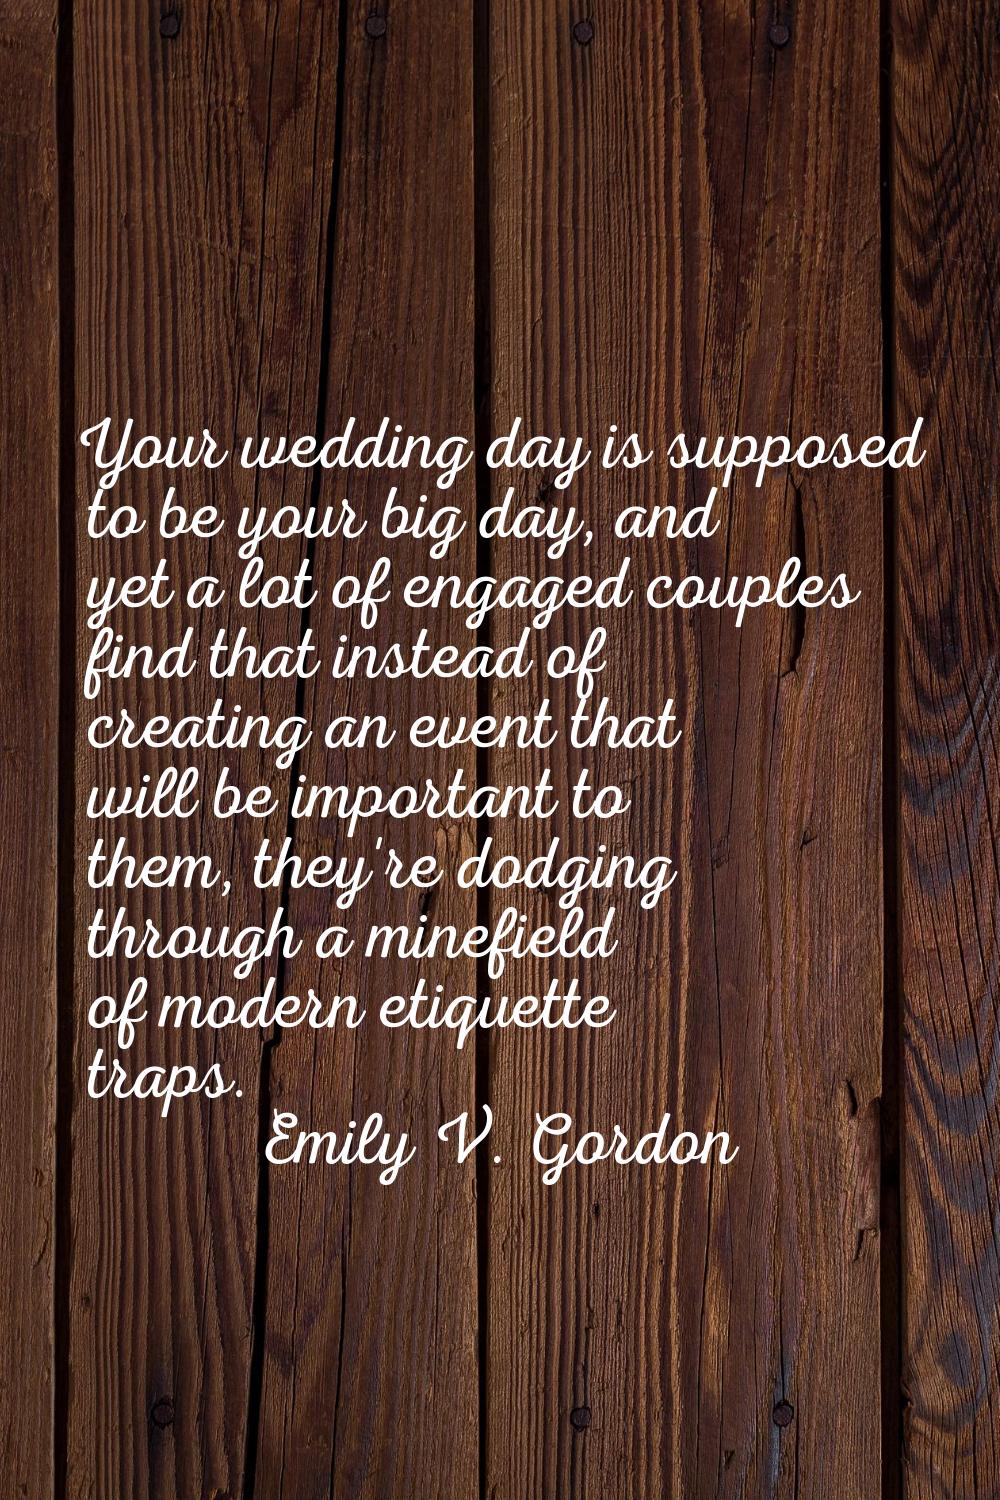 Your wedding day is supposed to be your big day, and yet a lot of engaged couples find that instead